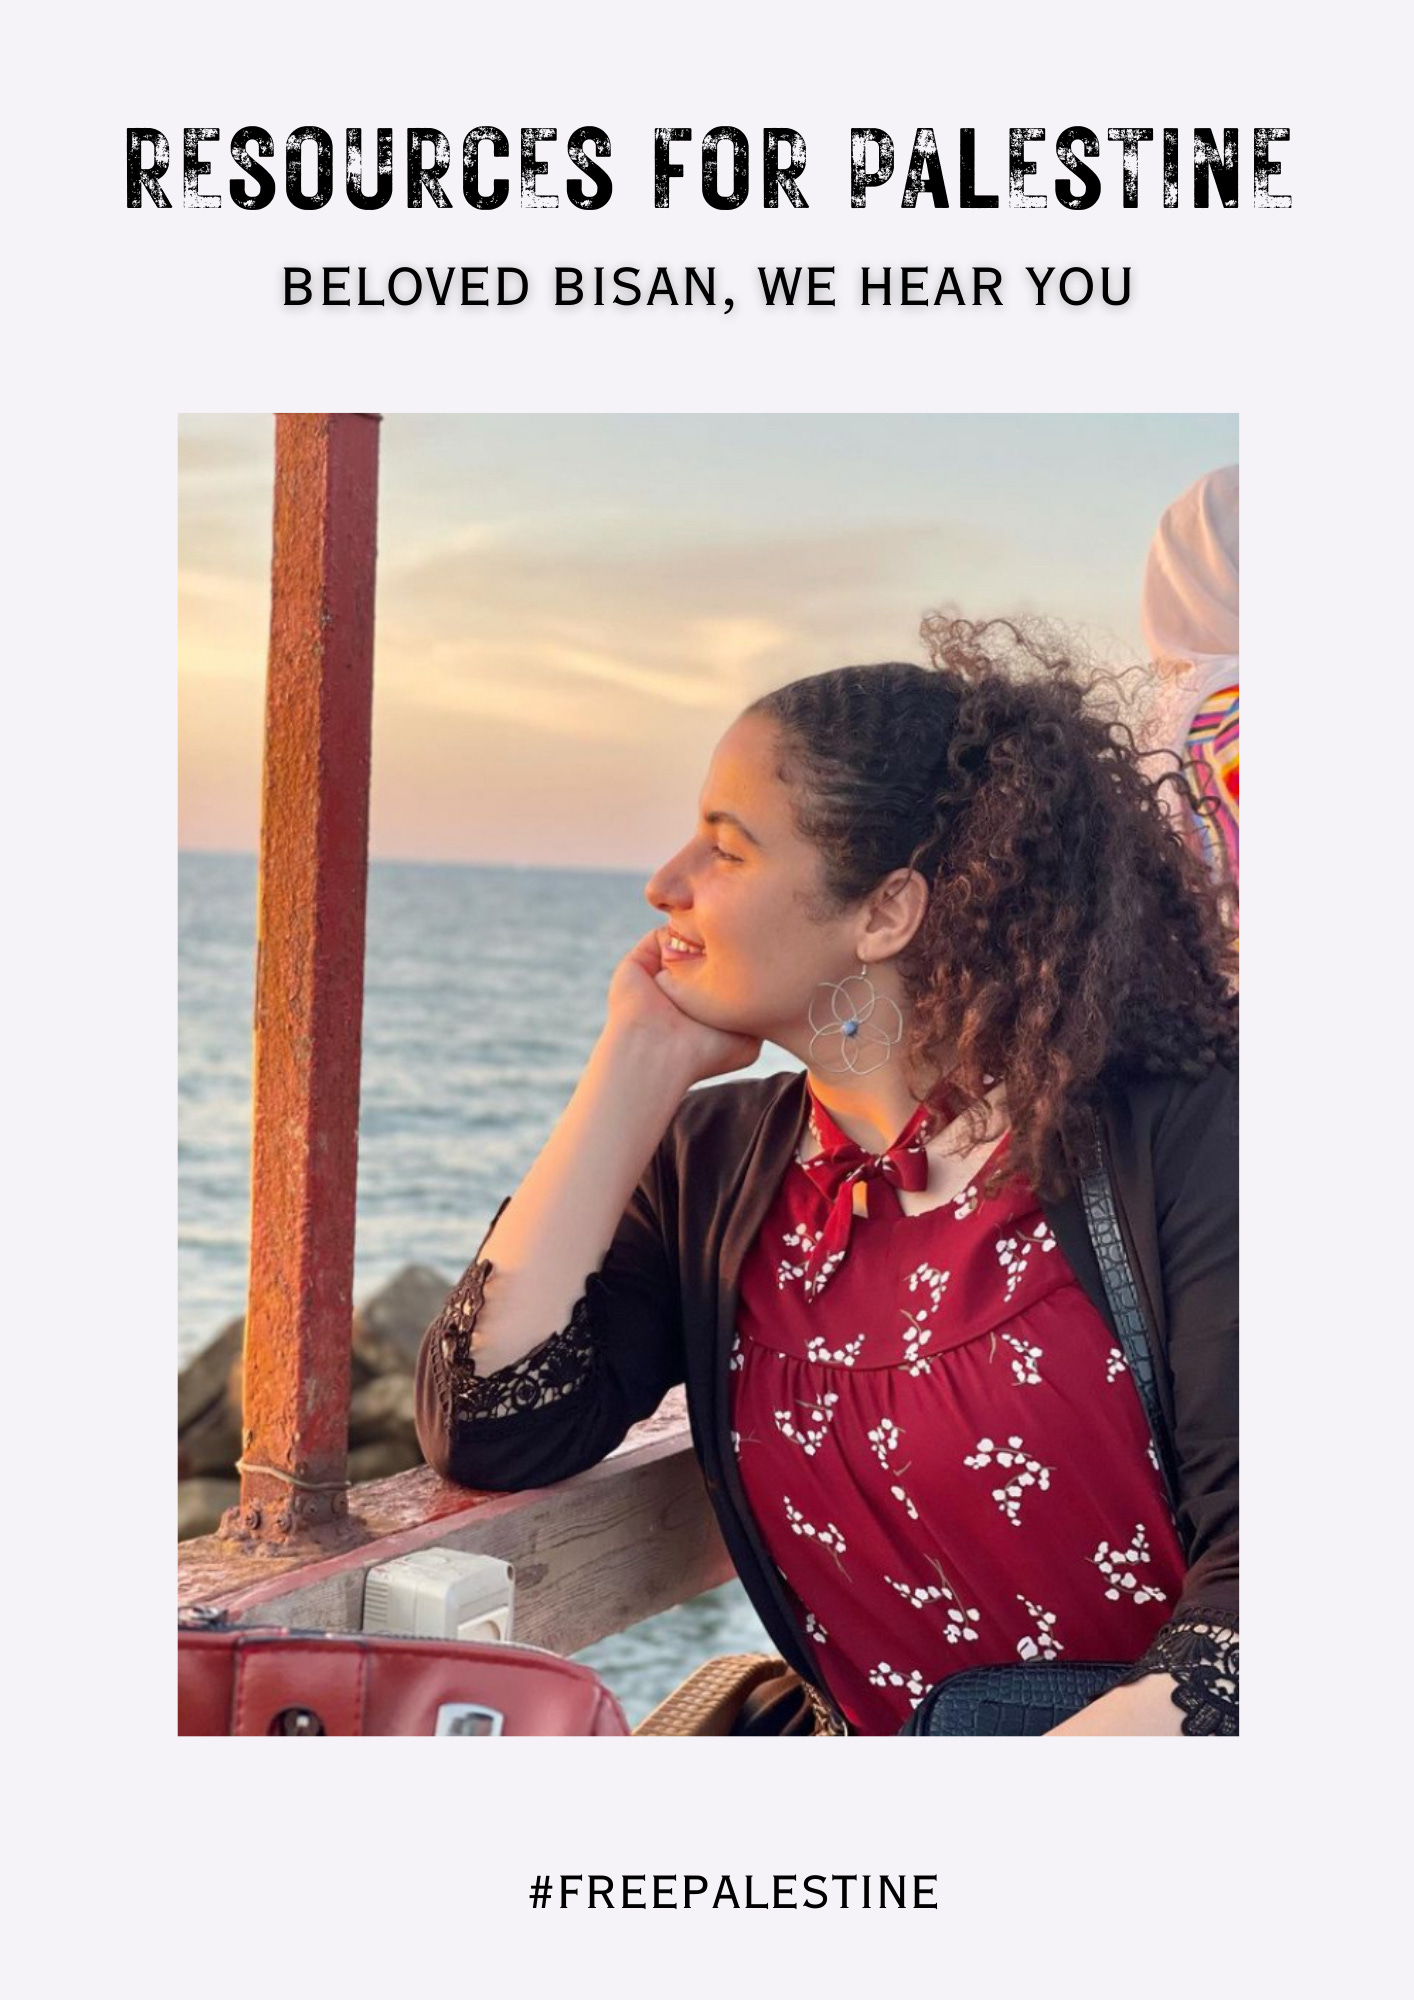 In bold black faded letters it reads Resources for Palestine. Underneath in a smaller font it reads “beloved Bisan, we hear you.” The image is of 24 year old Palestinian journalist Bisan Owda who documents her personal experience of the genocide in Gaza. In a picture from before the genocide began, Bisan has her hand under her chin and a red patterned shirt with a black jacket. She is sitting at what appears to be a cafe overlooking the water. The hashtag at the bottom reads Free Palestine.